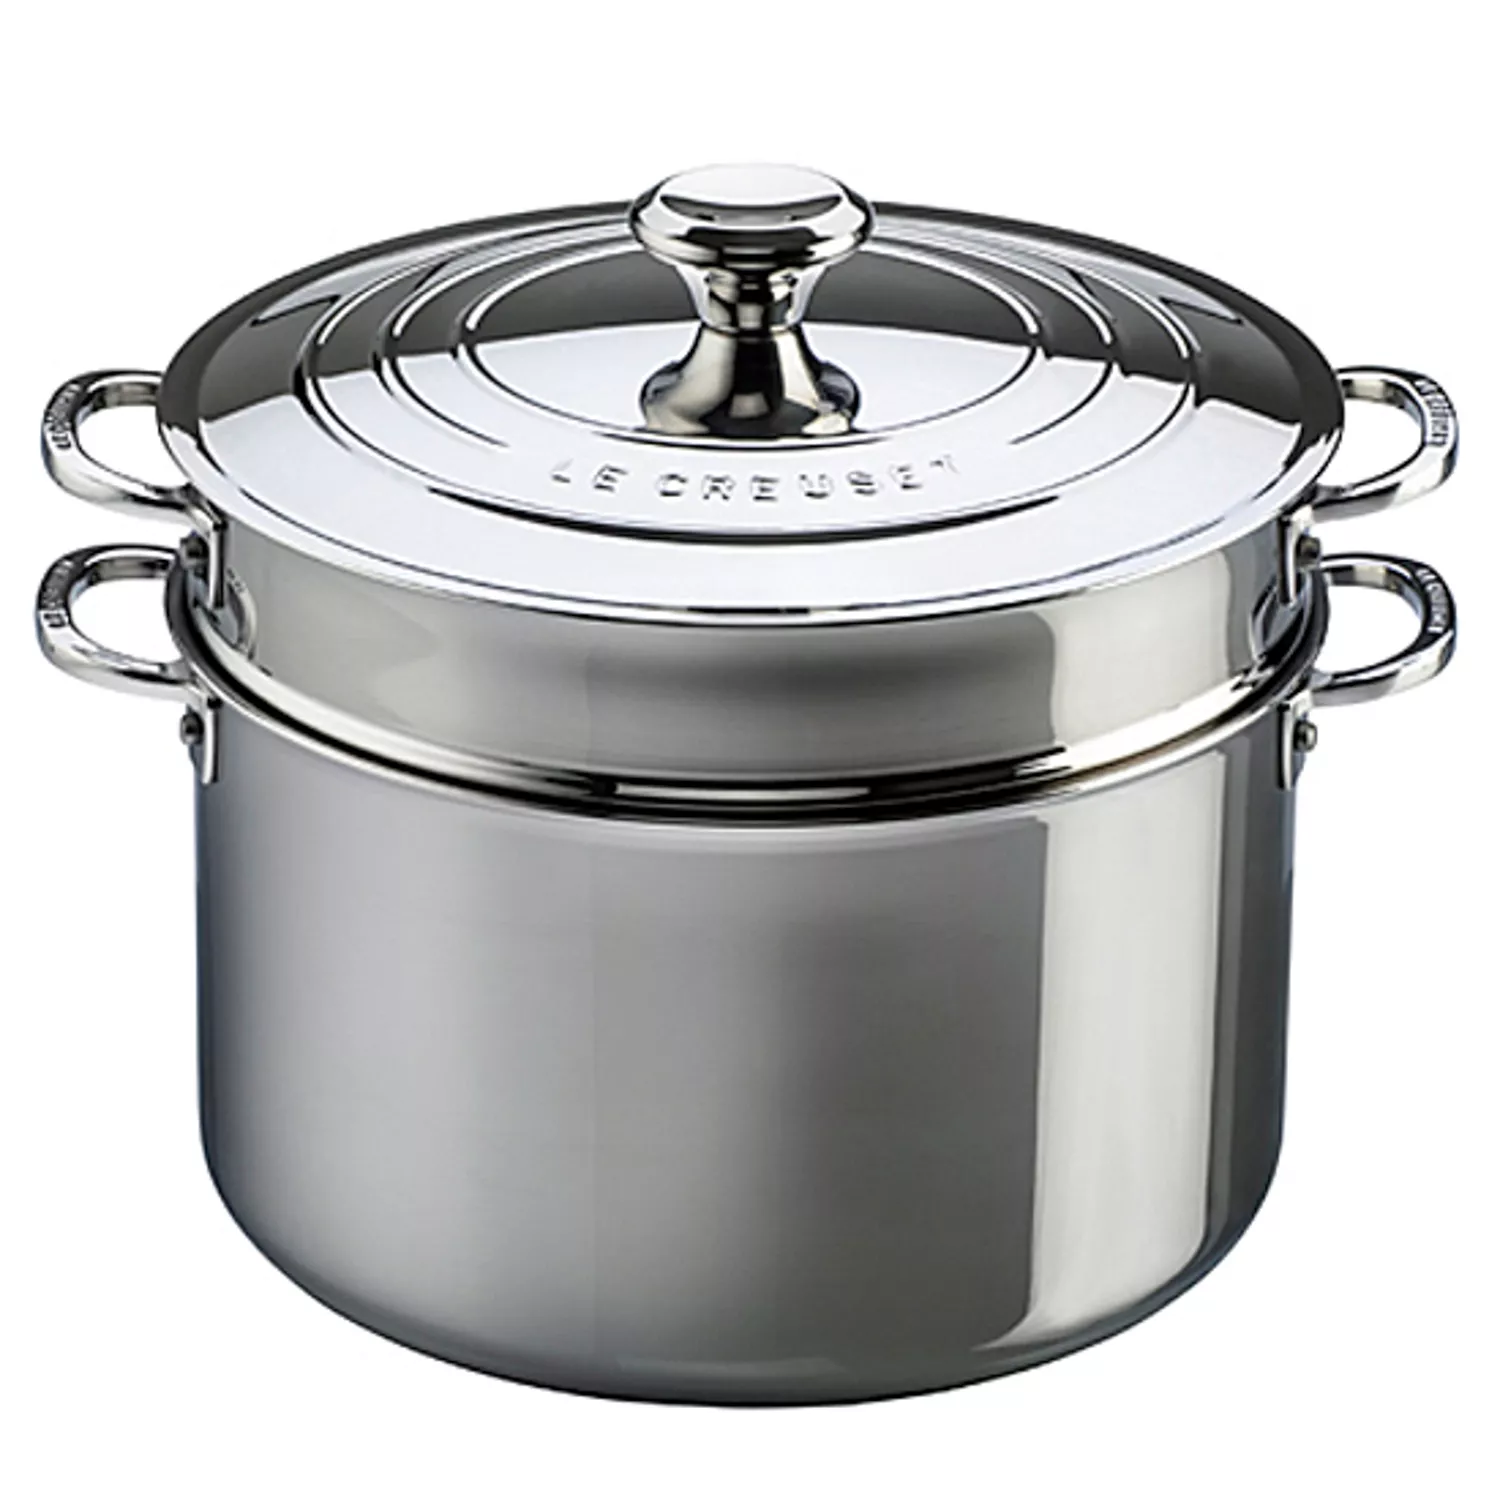 Heavy Duty 23-Quart Pressure Cooker CANNER X- Large Size Big Solid